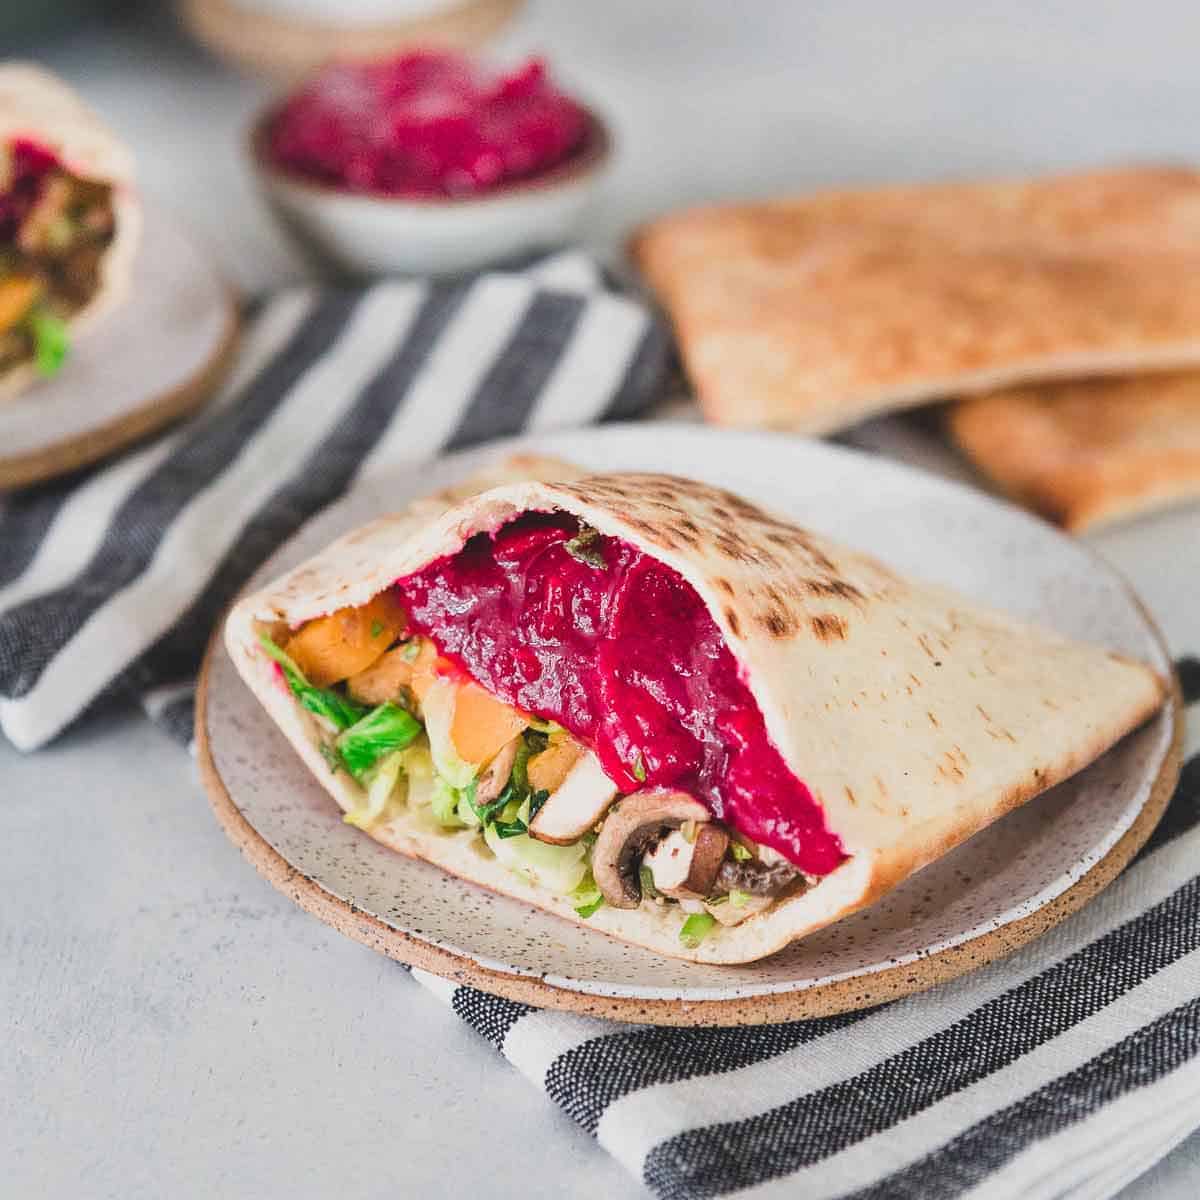 Make this easy cranberry vegetable sandwich using leftover Thanksgiving ingredients. It's an easy, vegetarian way to enjoy leftovers in a healthier way after a day of indulgence.